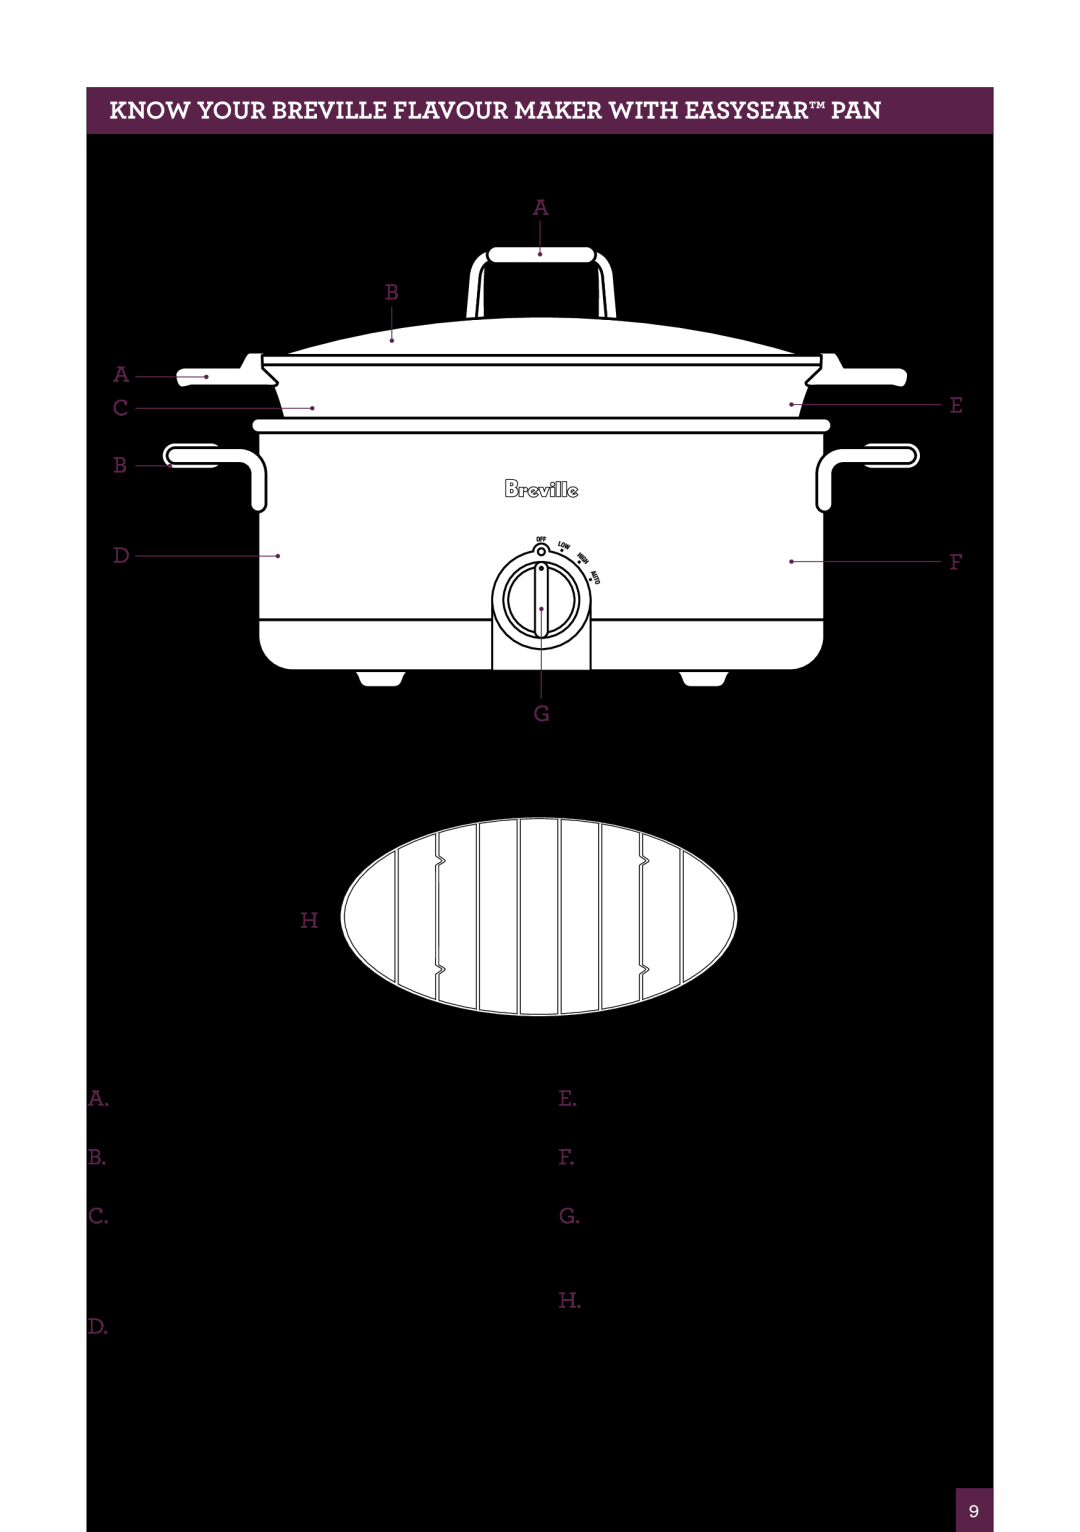 Breville BSC500 manual A B A C B D G H, A.Silicon handle covers For heat protection 